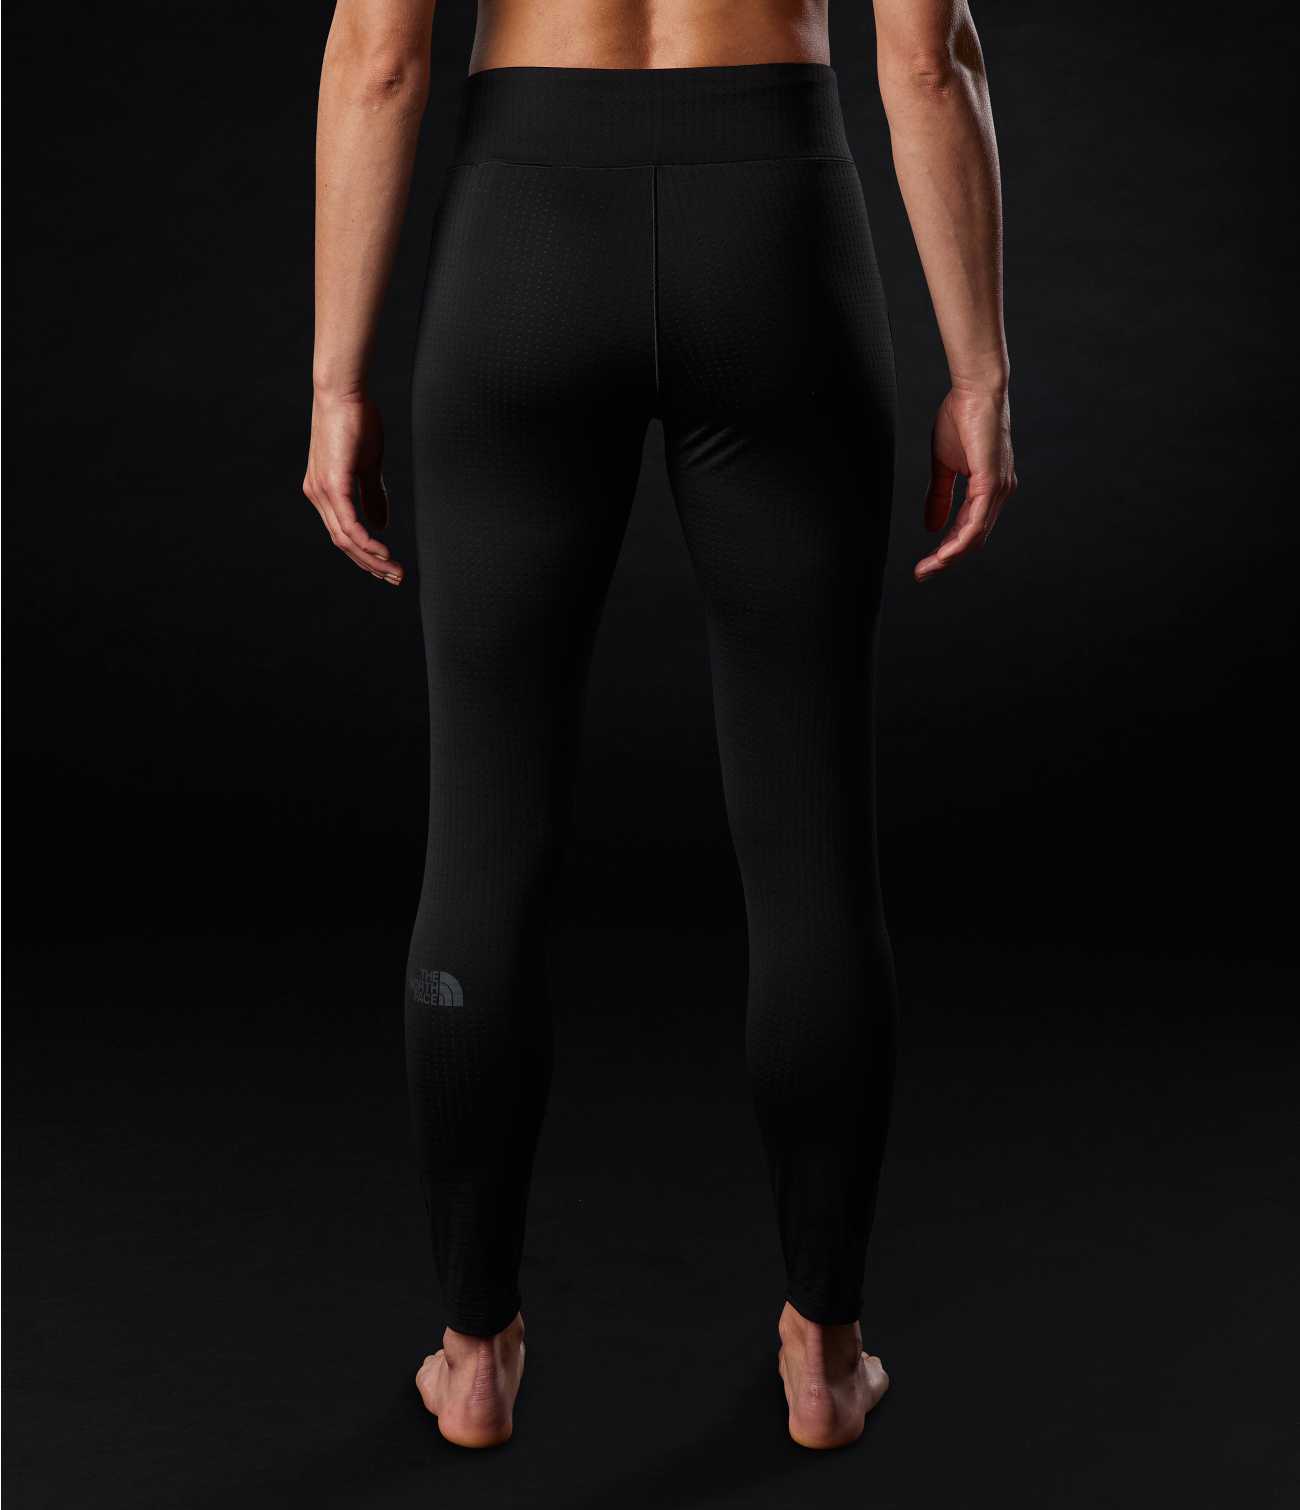 https://images.thenorthface.com/is/image/TheNorthFace/NF0A5ADV_JK3_back?wid=1300&hei=1510&fmt=jpeg&qlt=50&resMode=sharp